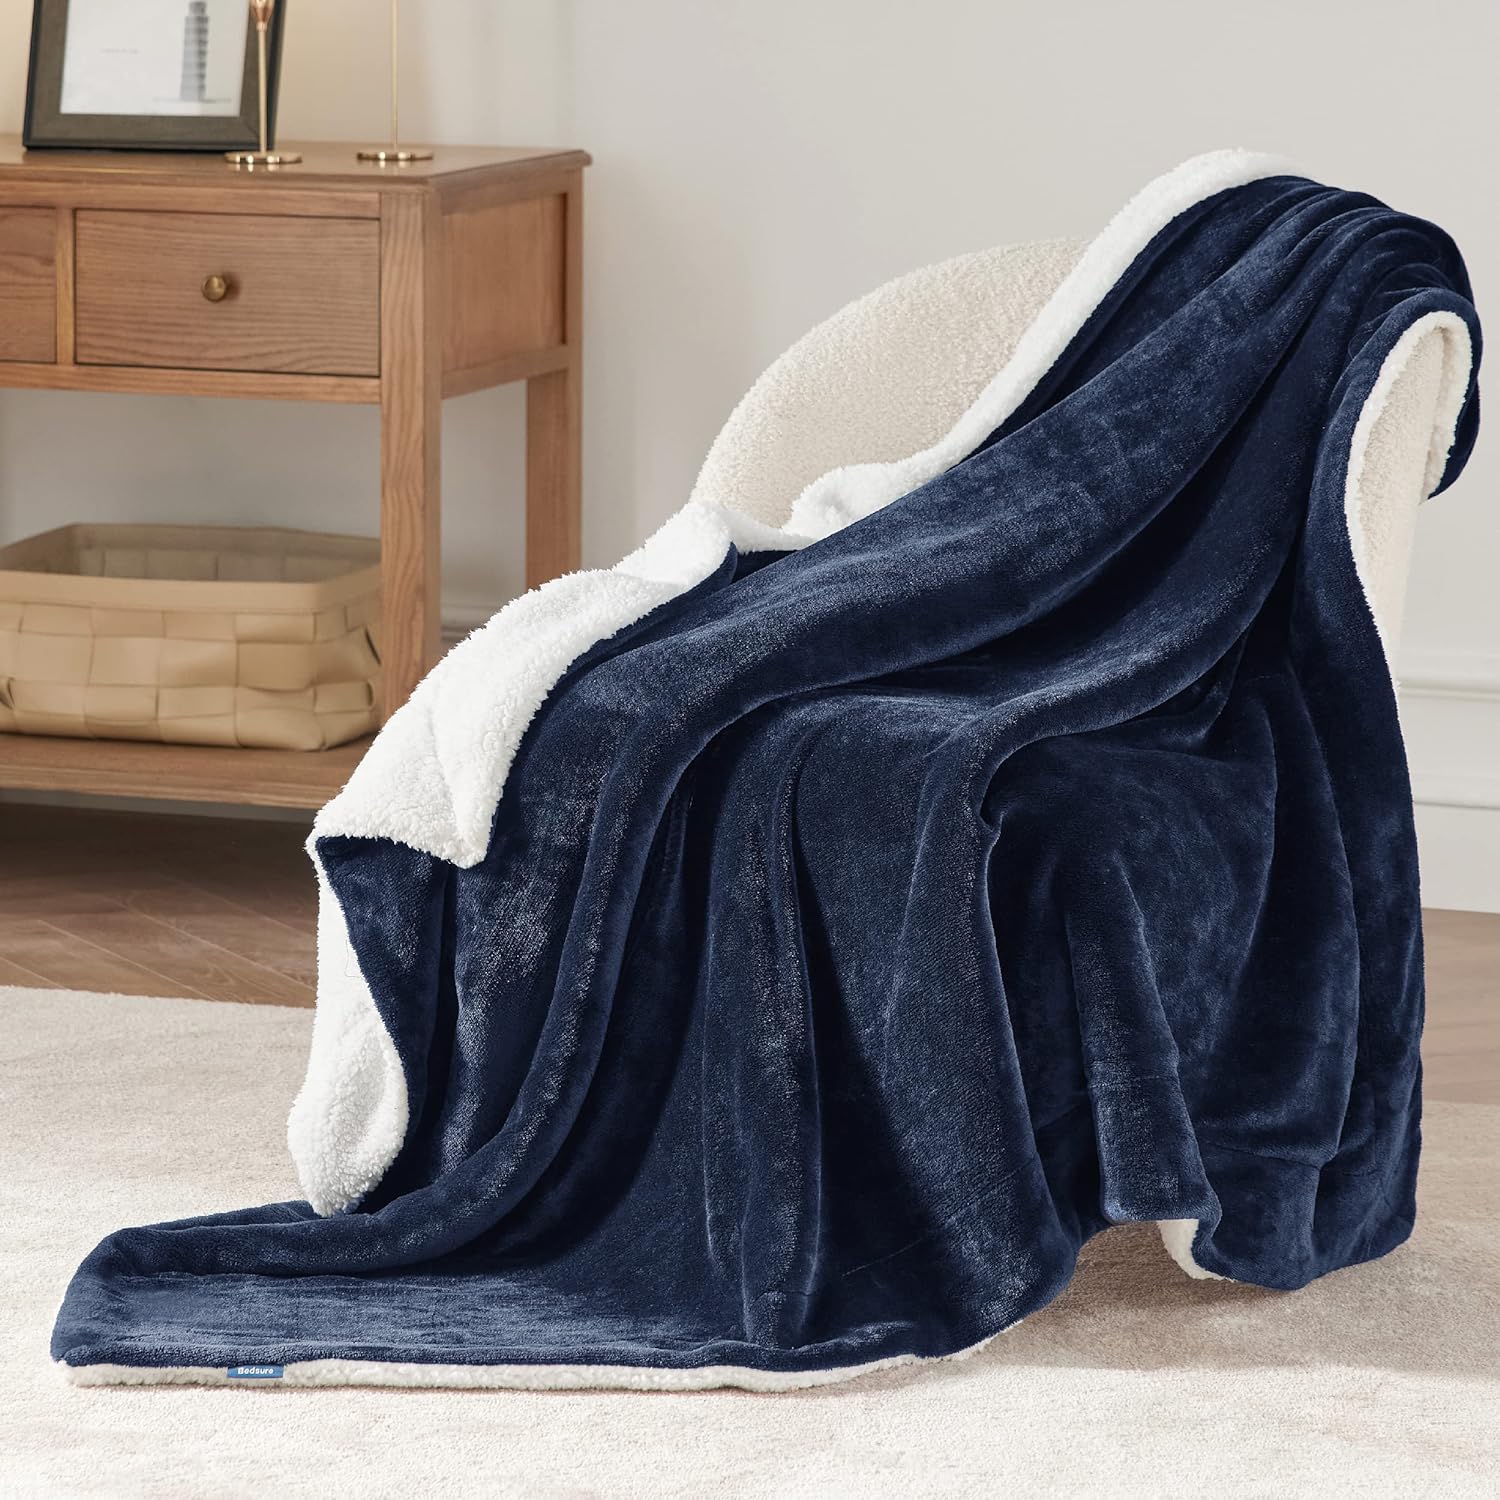 Learn more about our velveteen plush and sherpa fleece throw blankets